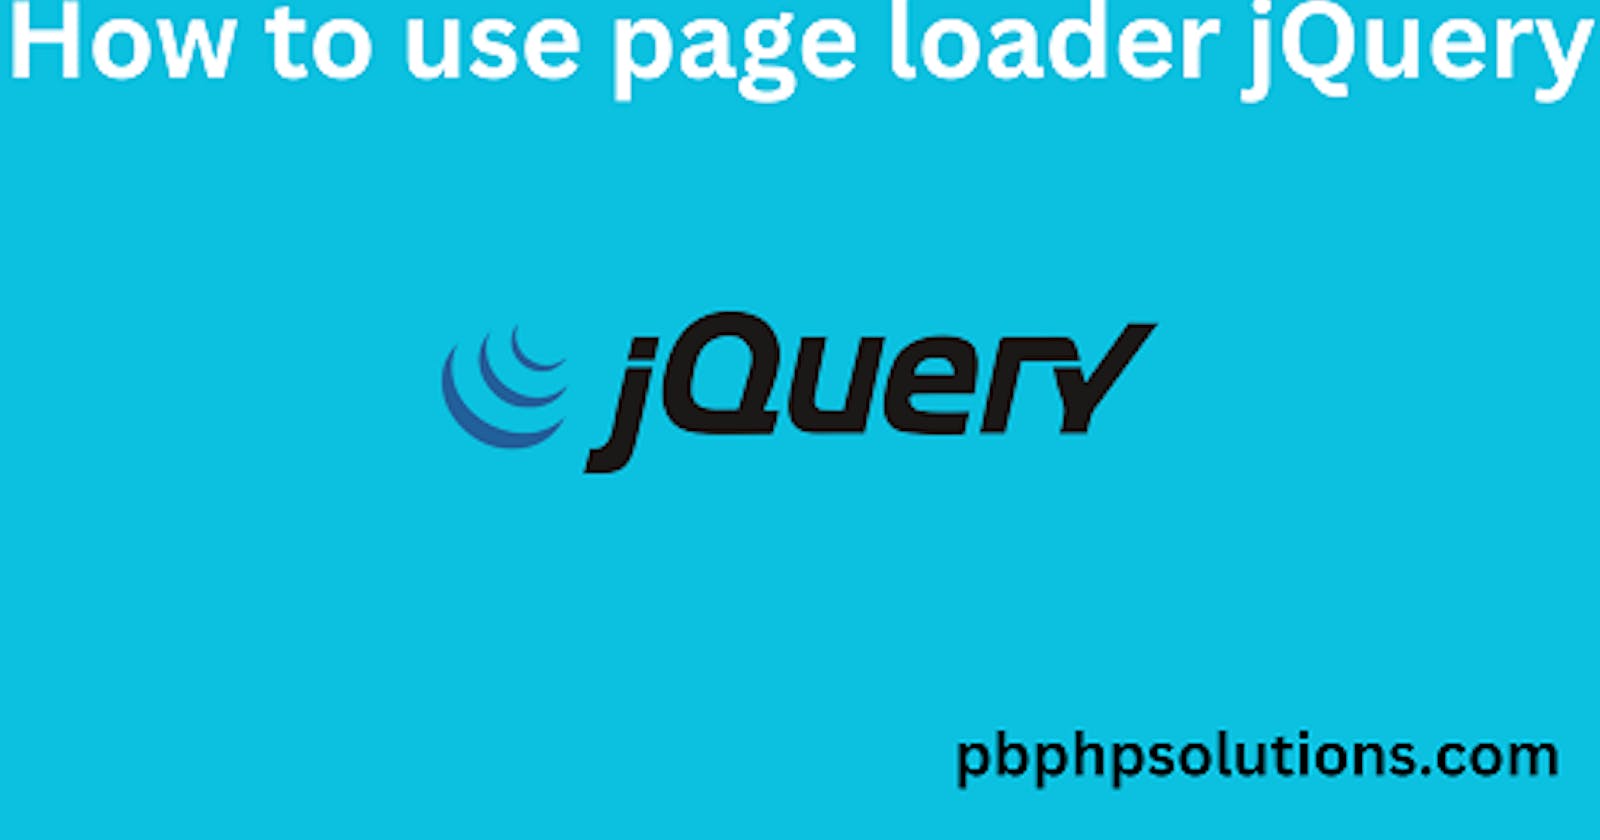 How to use page loader jQuery